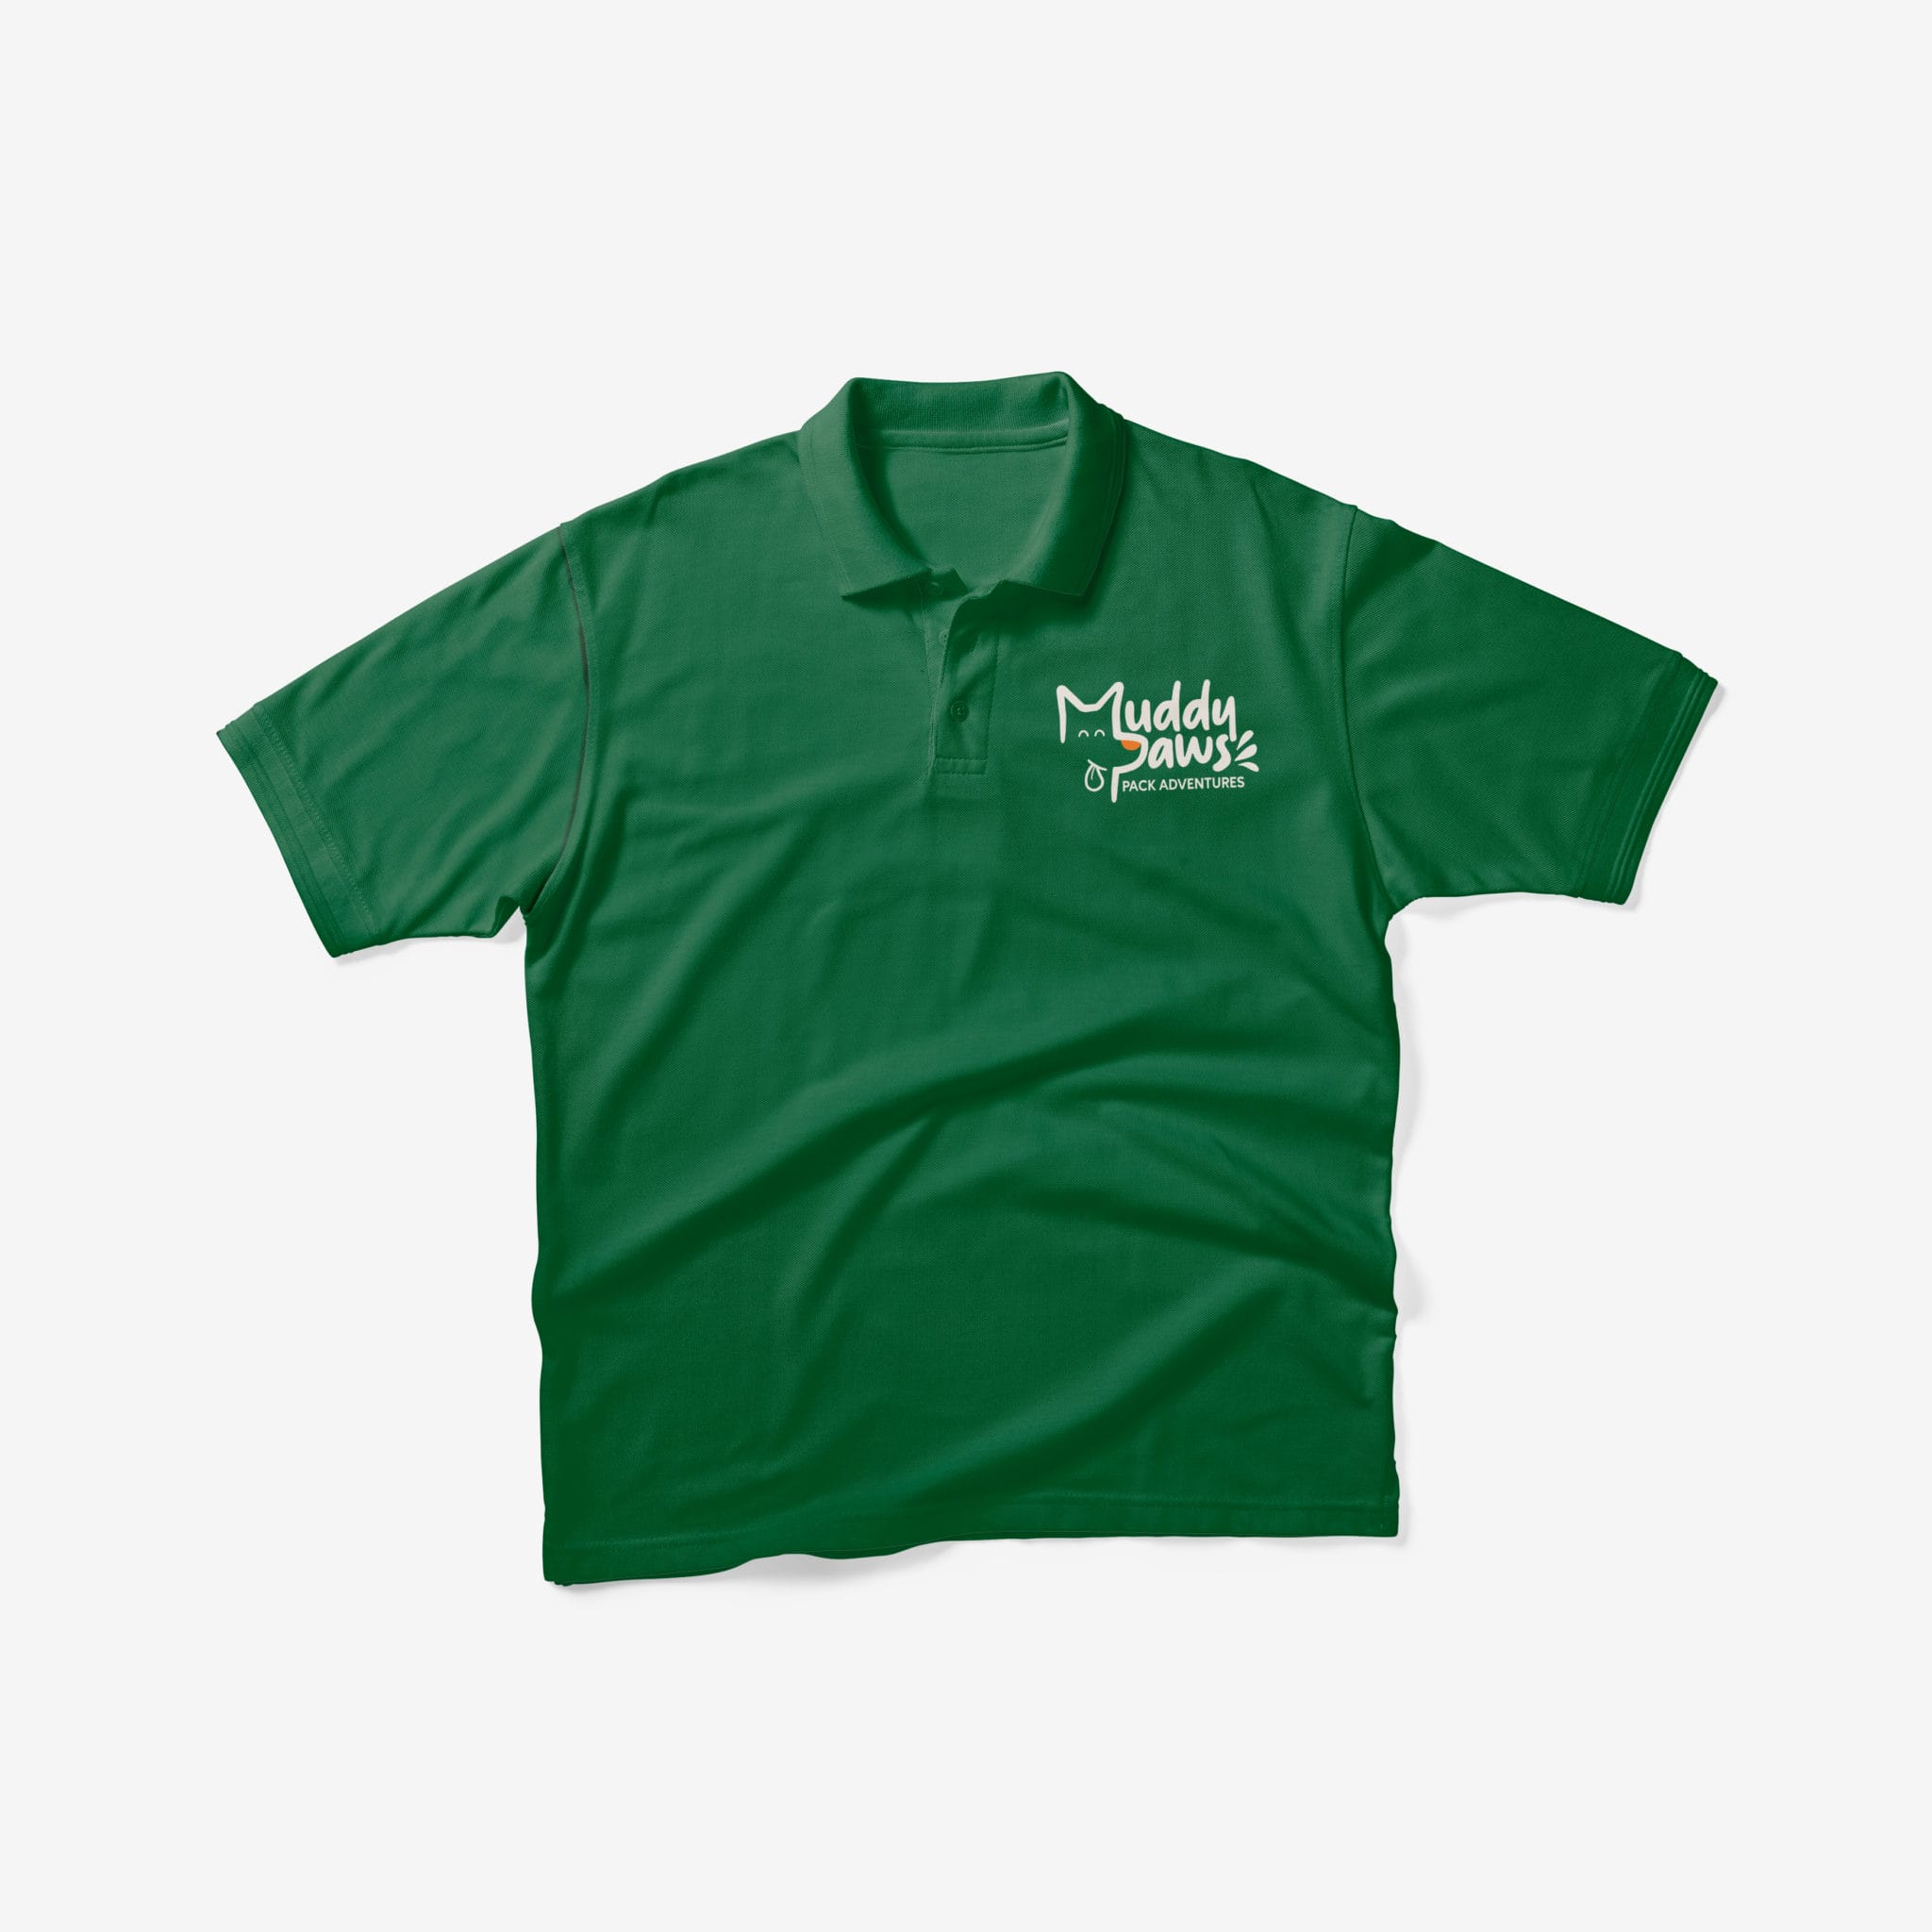 A green polo shirt with a small business logo on it.